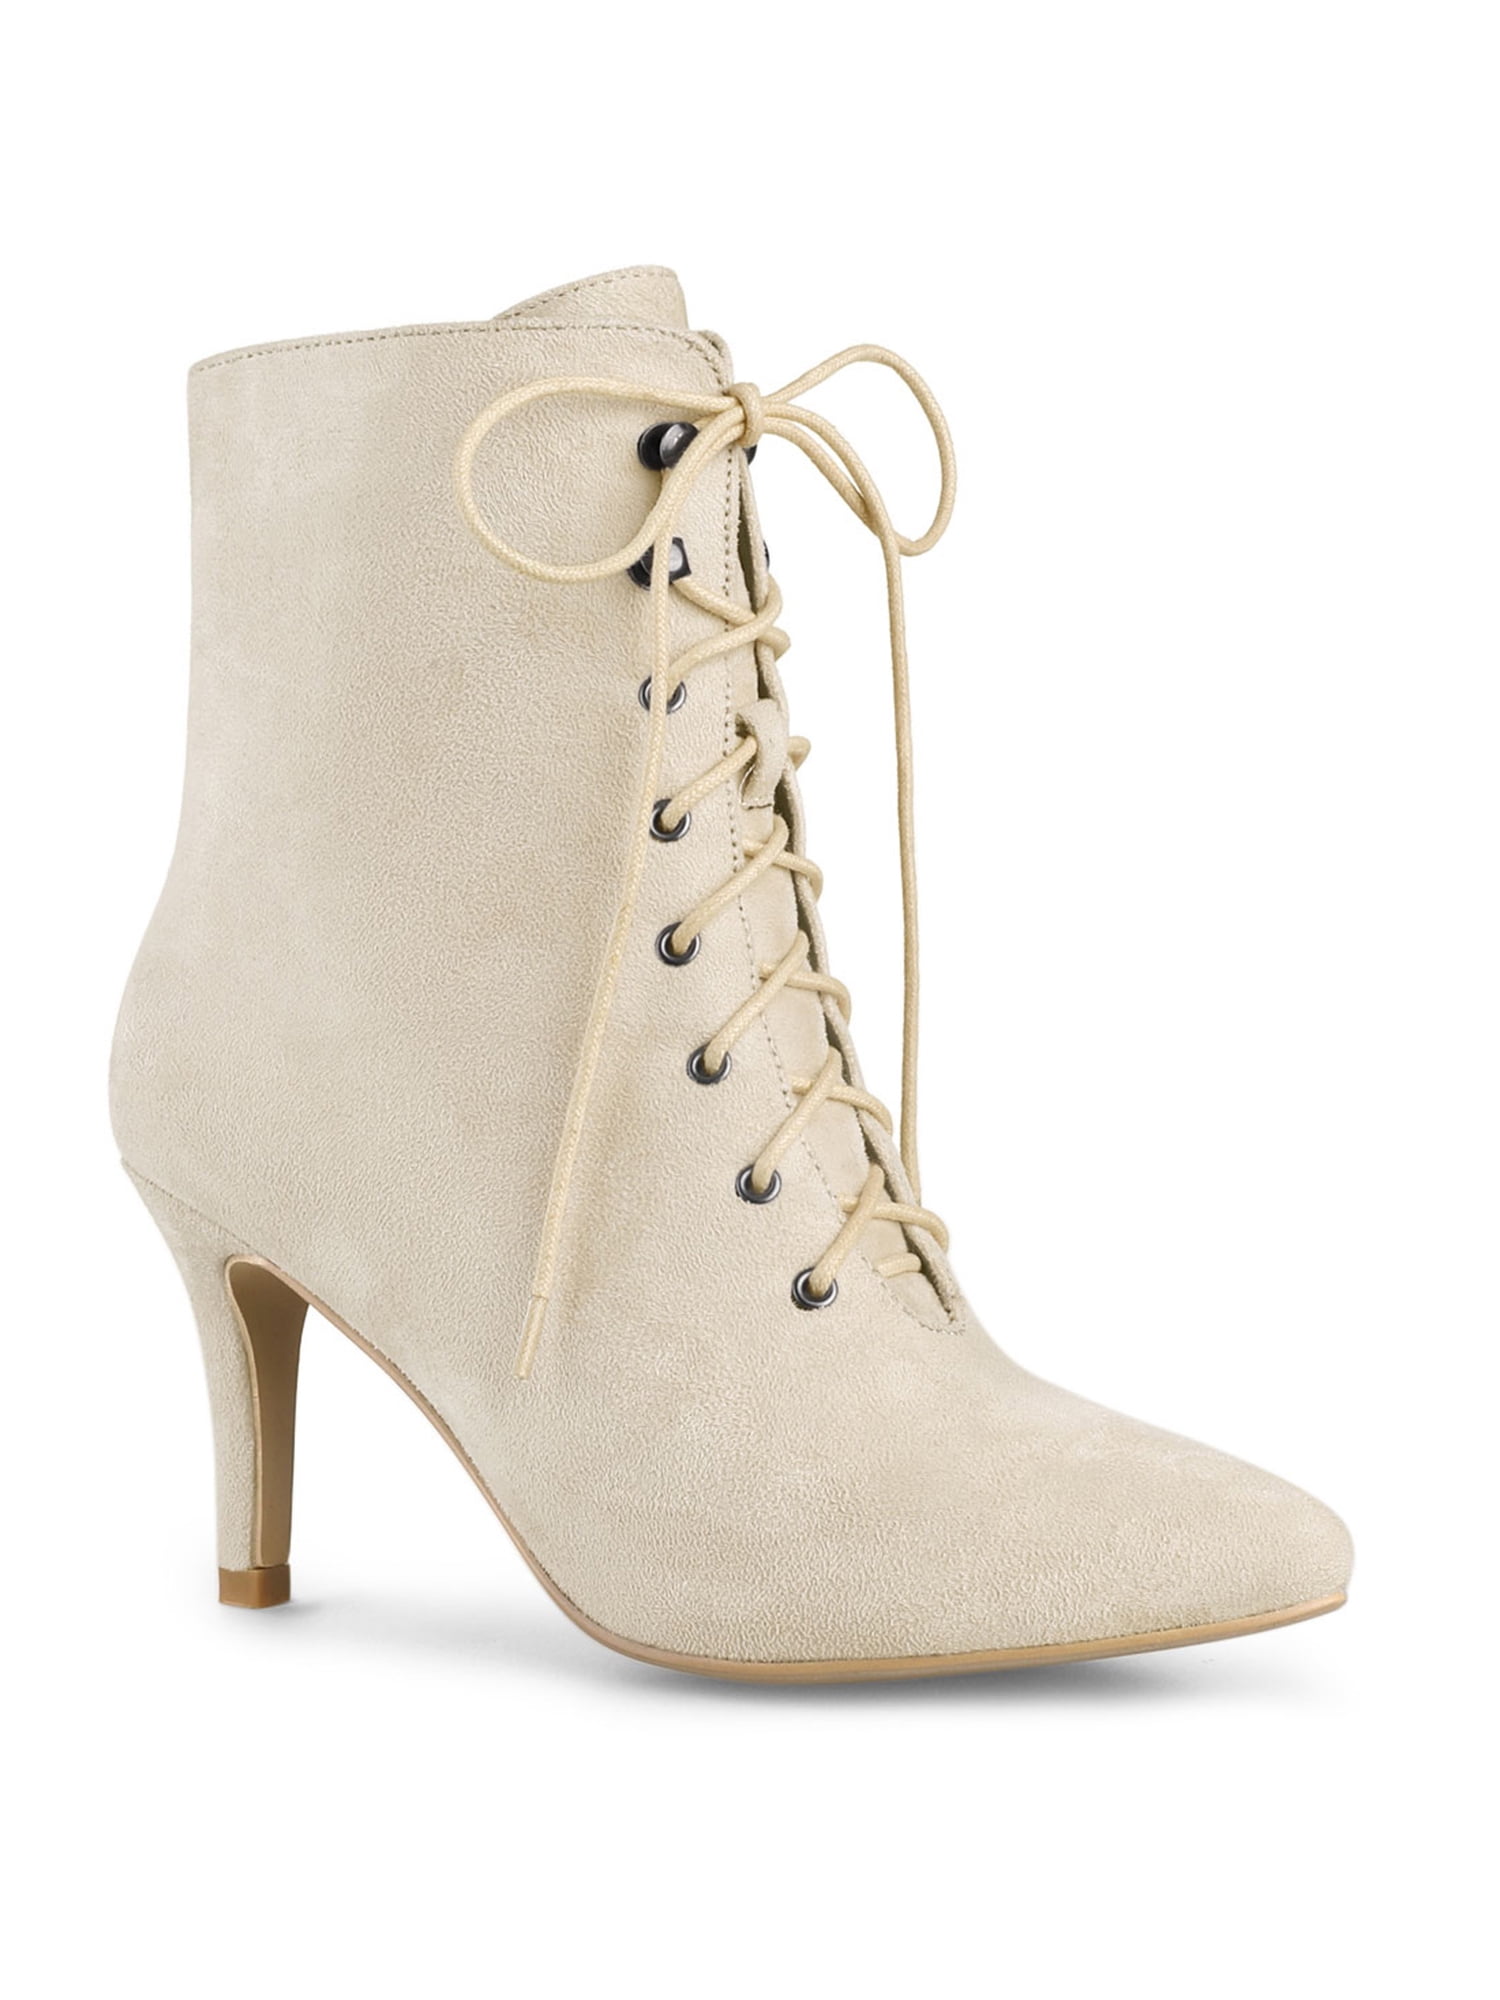 Womens Trendy Inside Zip Up Pointed Toe Dressy Booties Block High Heel Ankle Boots with Zipper Beige